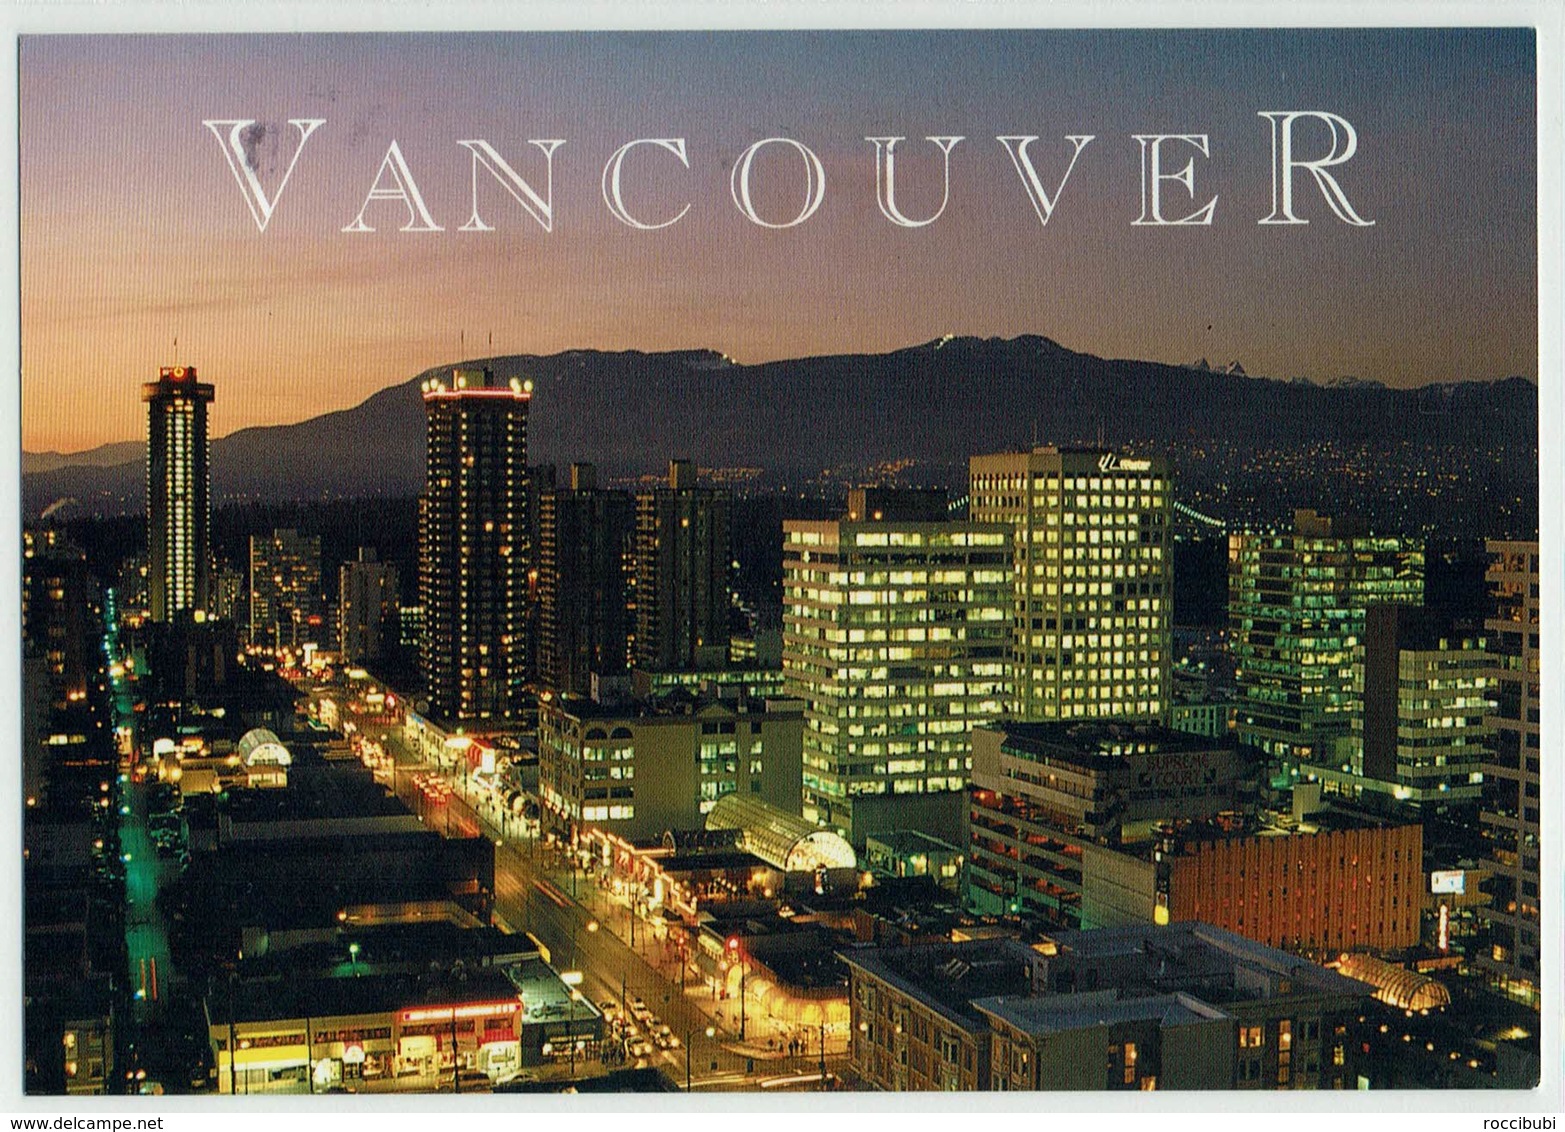 Vancouver - Modern Cards